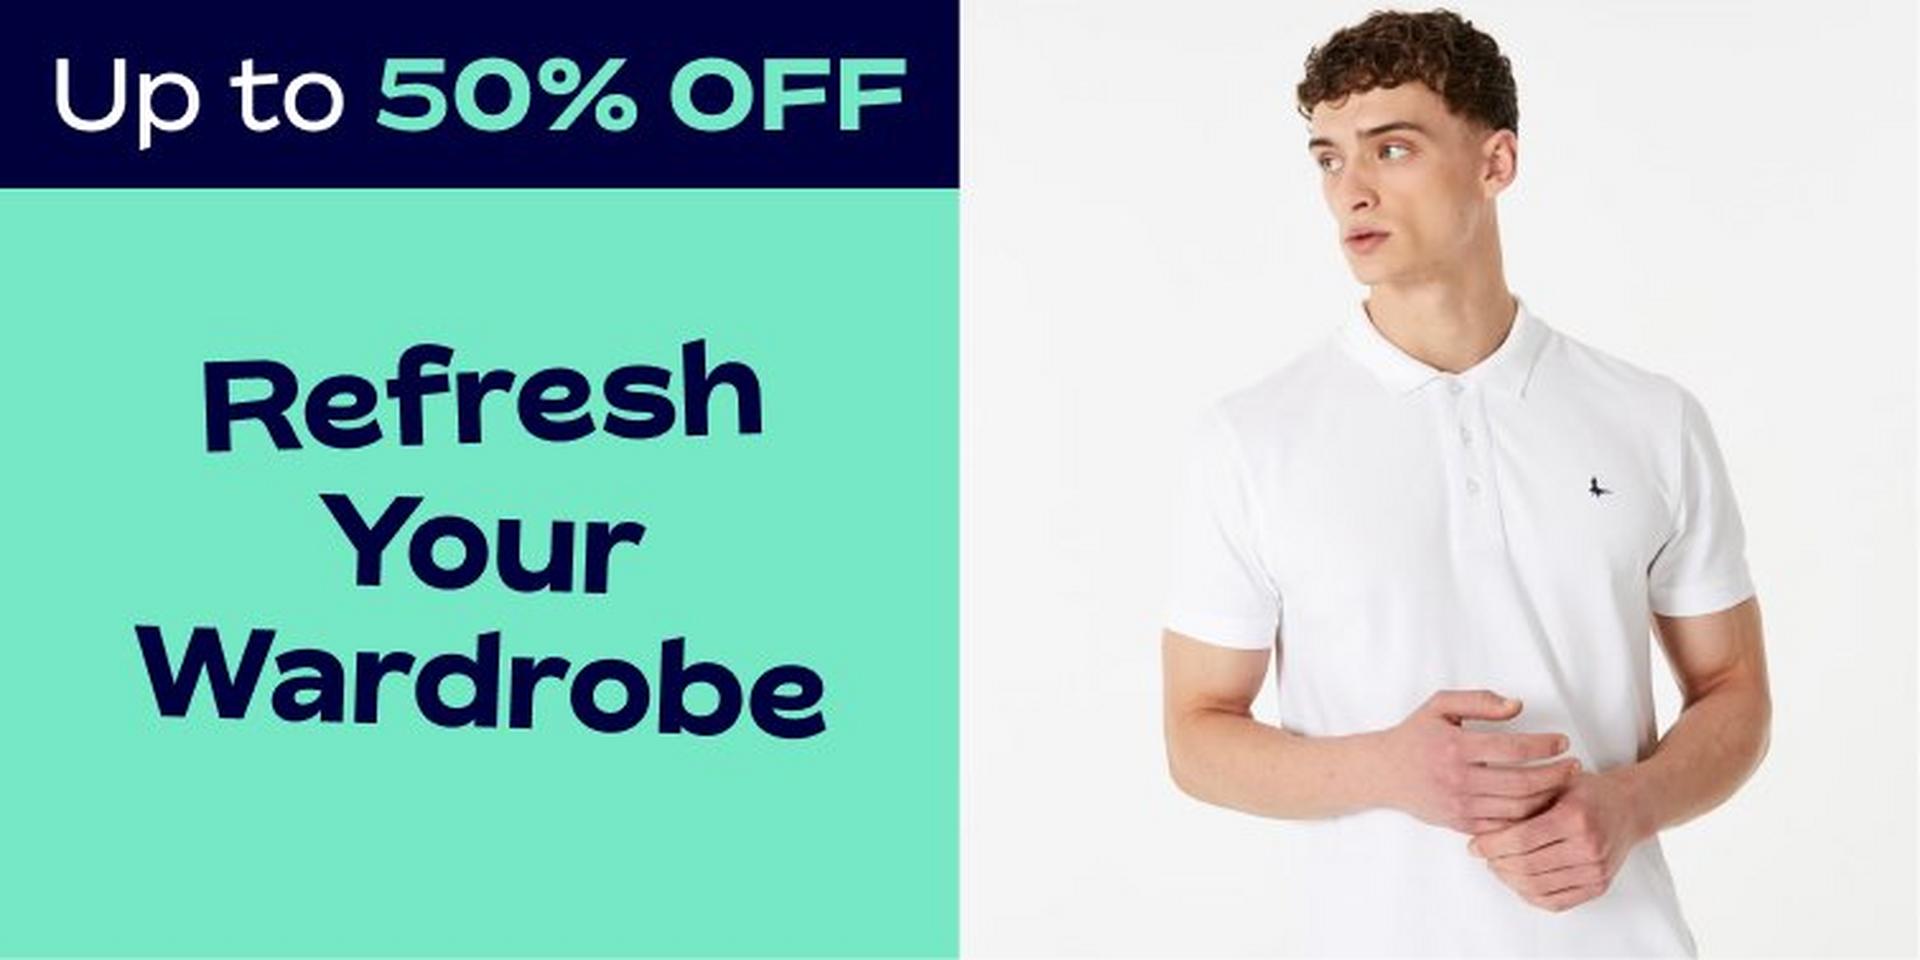 Up to 50% Off - Man wearing white polo shirt